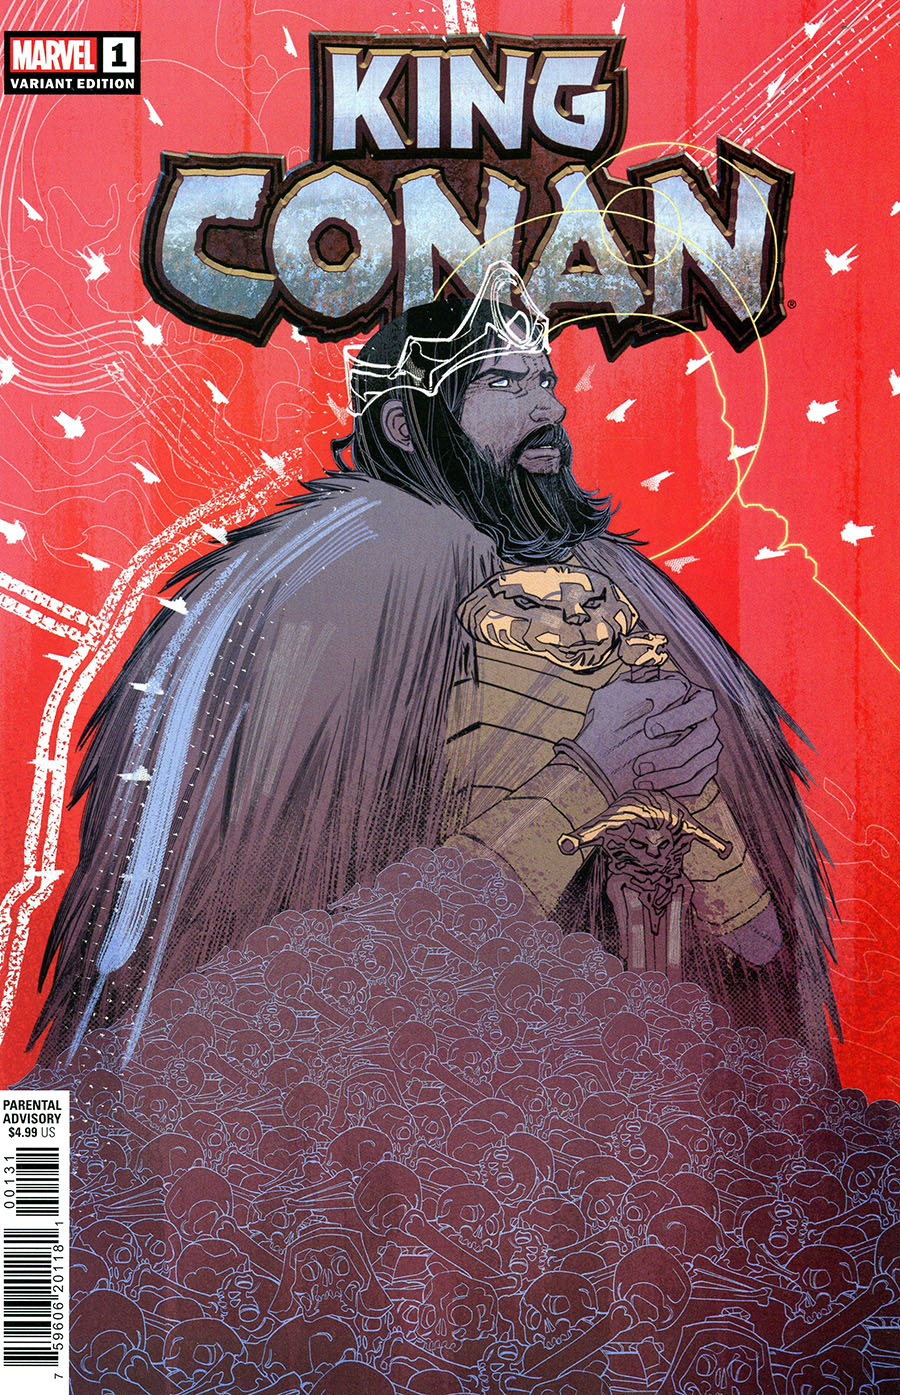 King Conan Vol 2 #1 Cover B Variant Marguerite Sauvage Cover